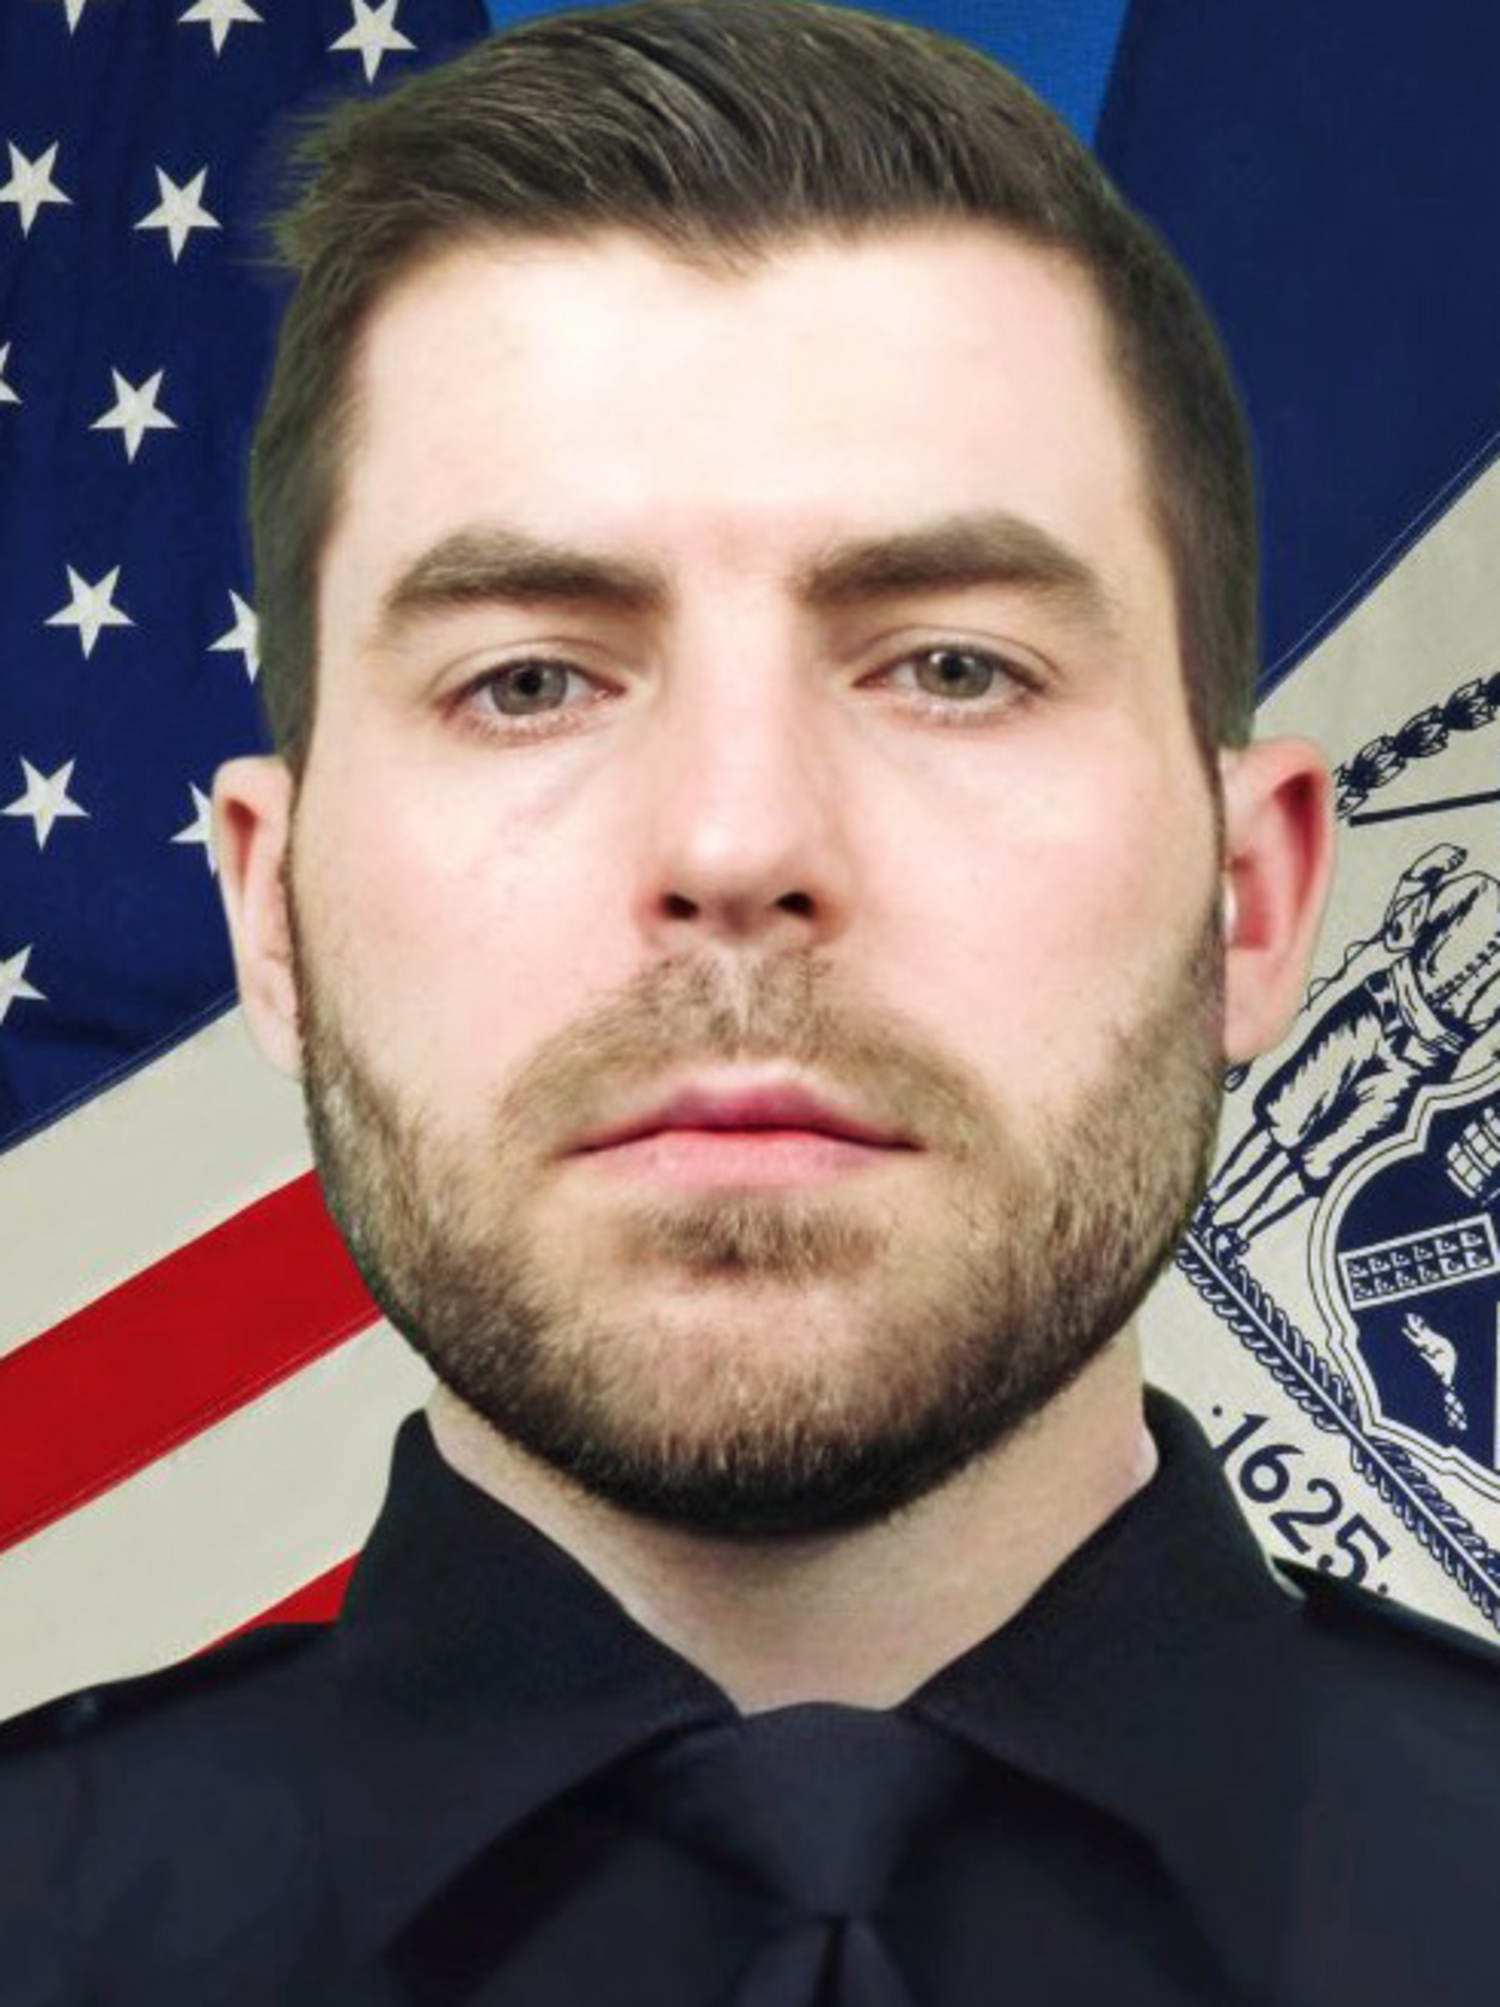 New York City officer killed during traffic stop shootout, first cop slaying for city in 2 years